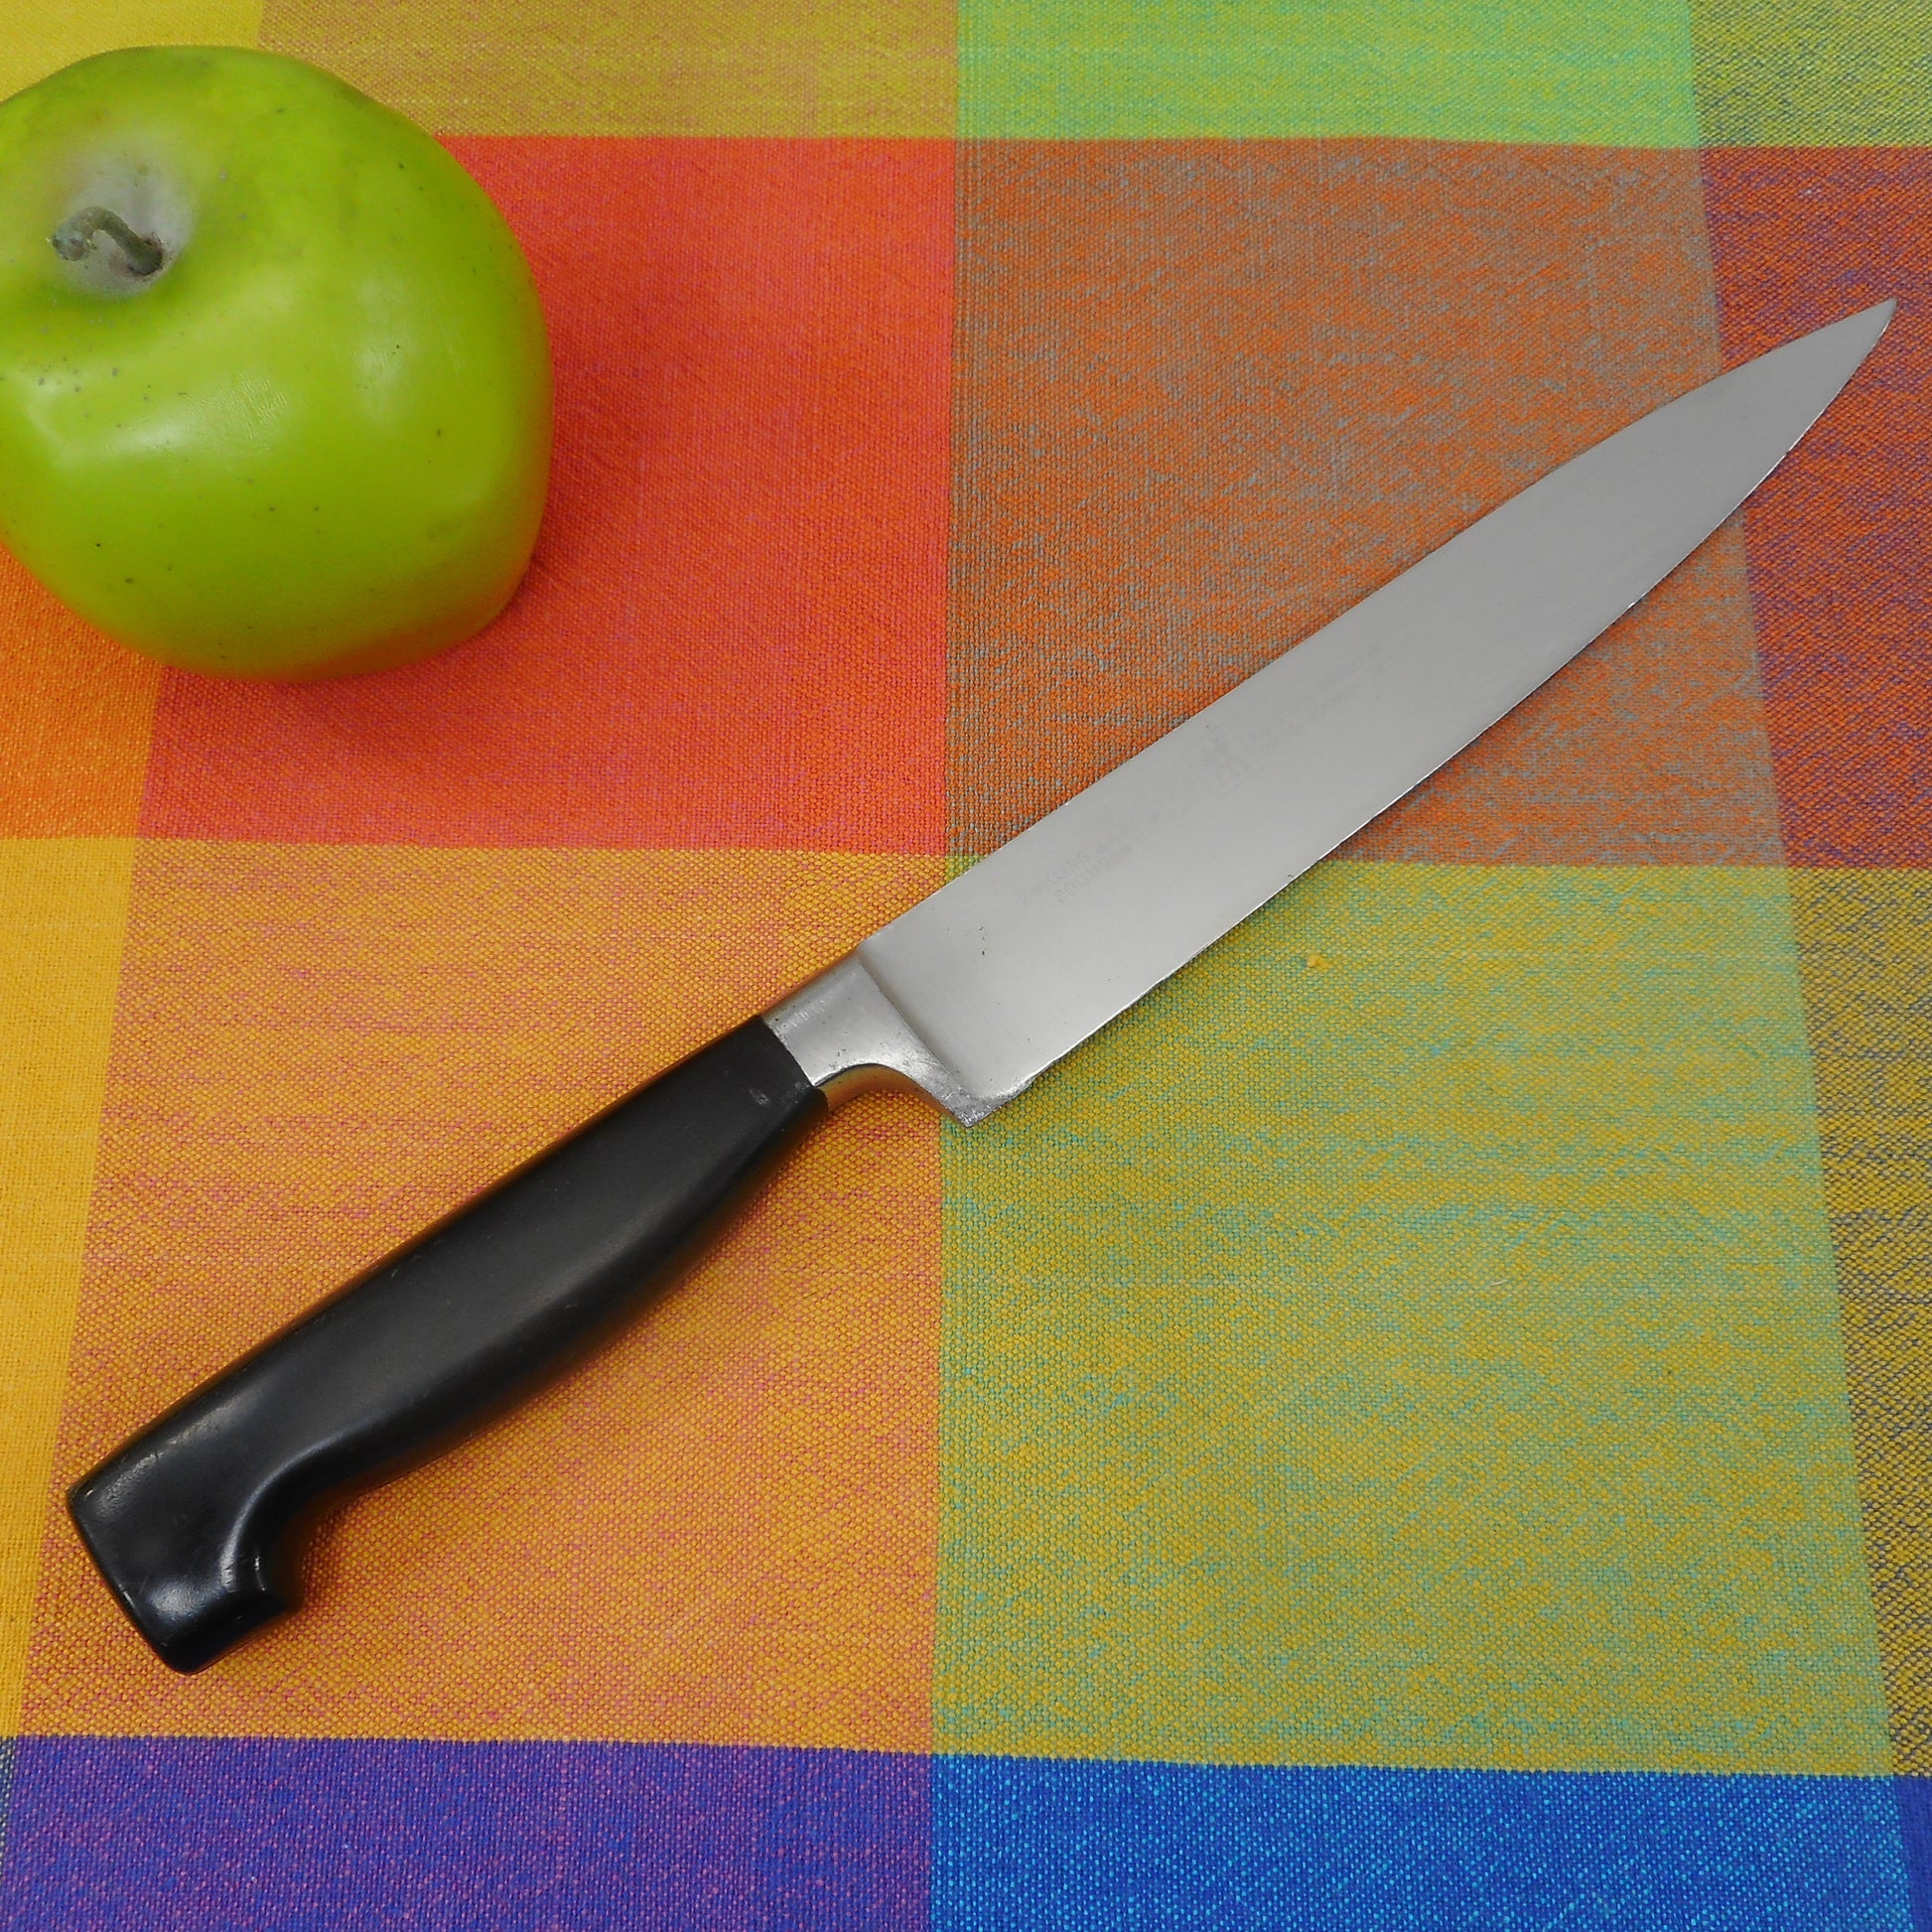 J.A. Henckels Germany 31070-200mm 8 Stainless Carving Knife